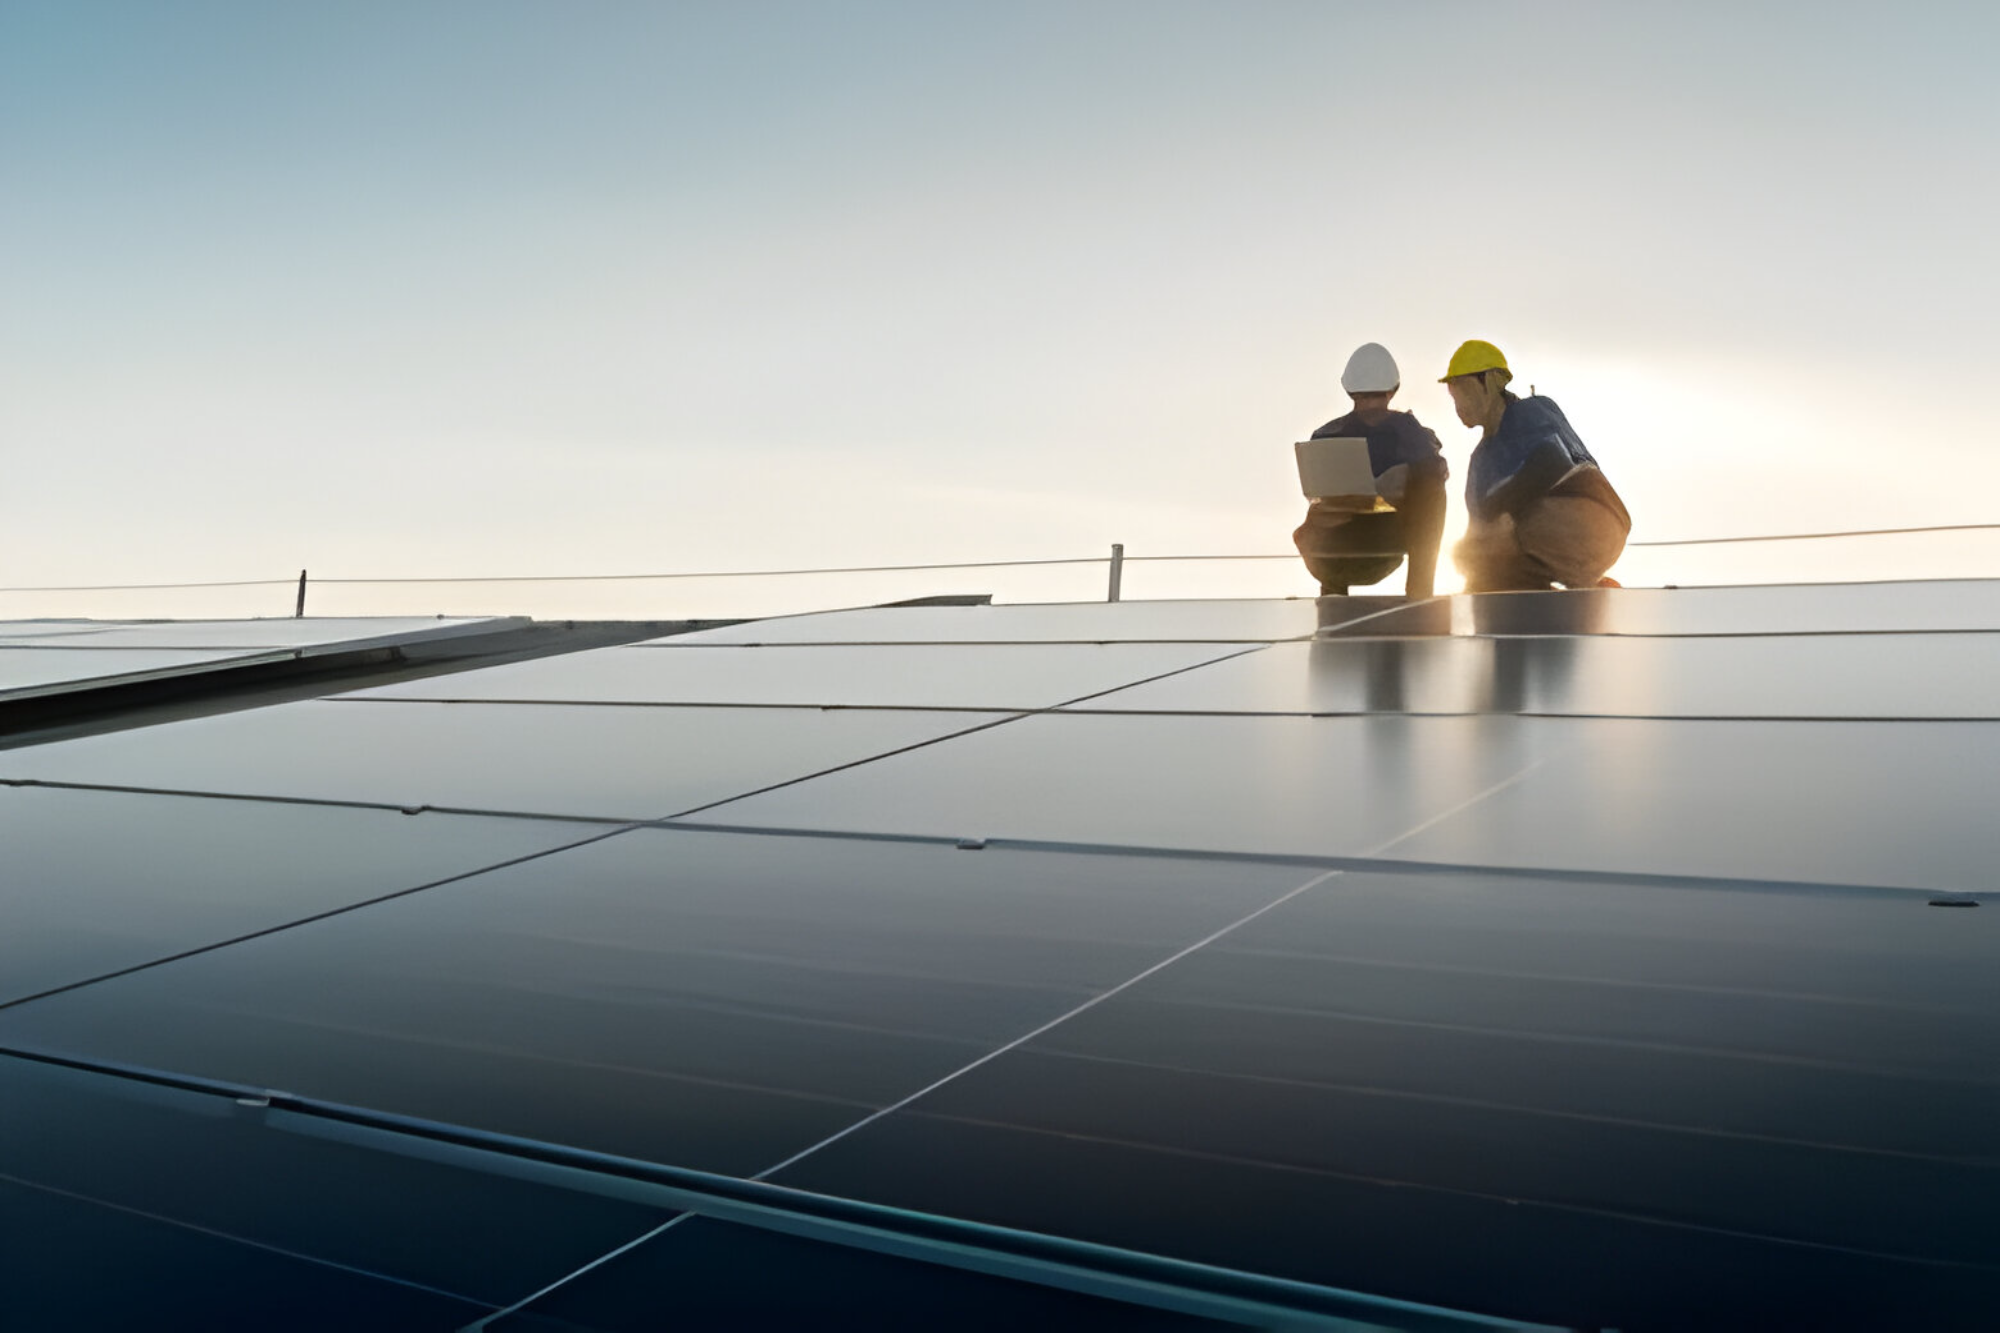 The installation of rooftop solar panels is rapidly gaining momentum